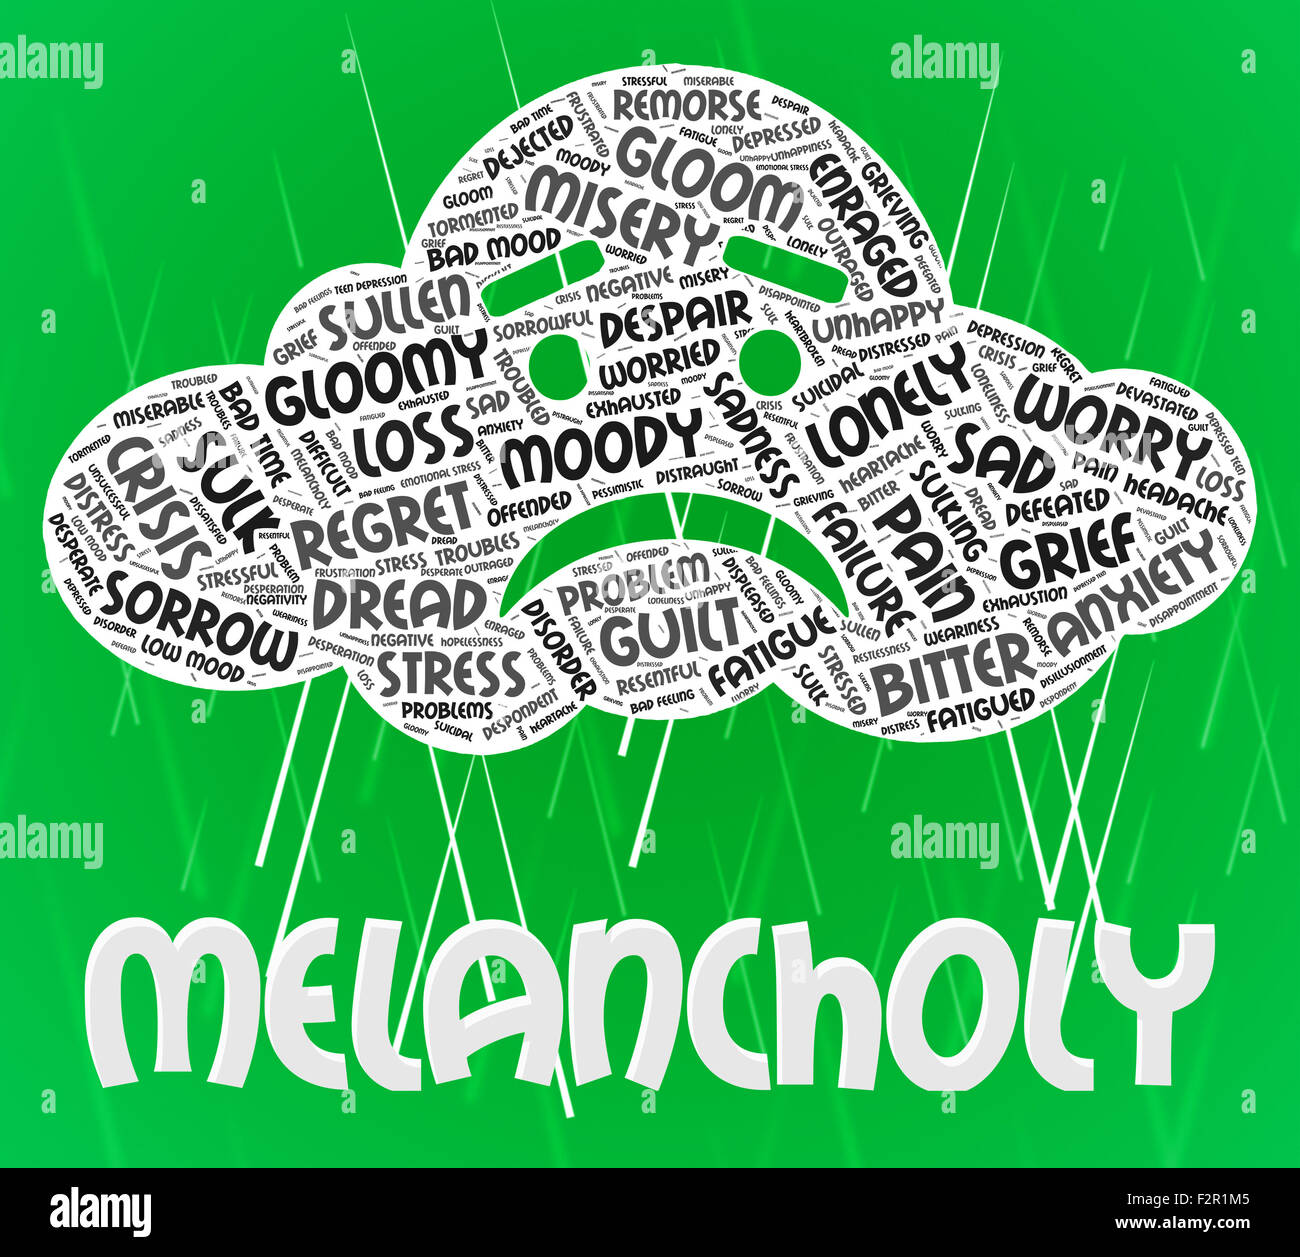 Melancholy Word Showing Pessimism Dispiritedness And Gloominess Stock Photo